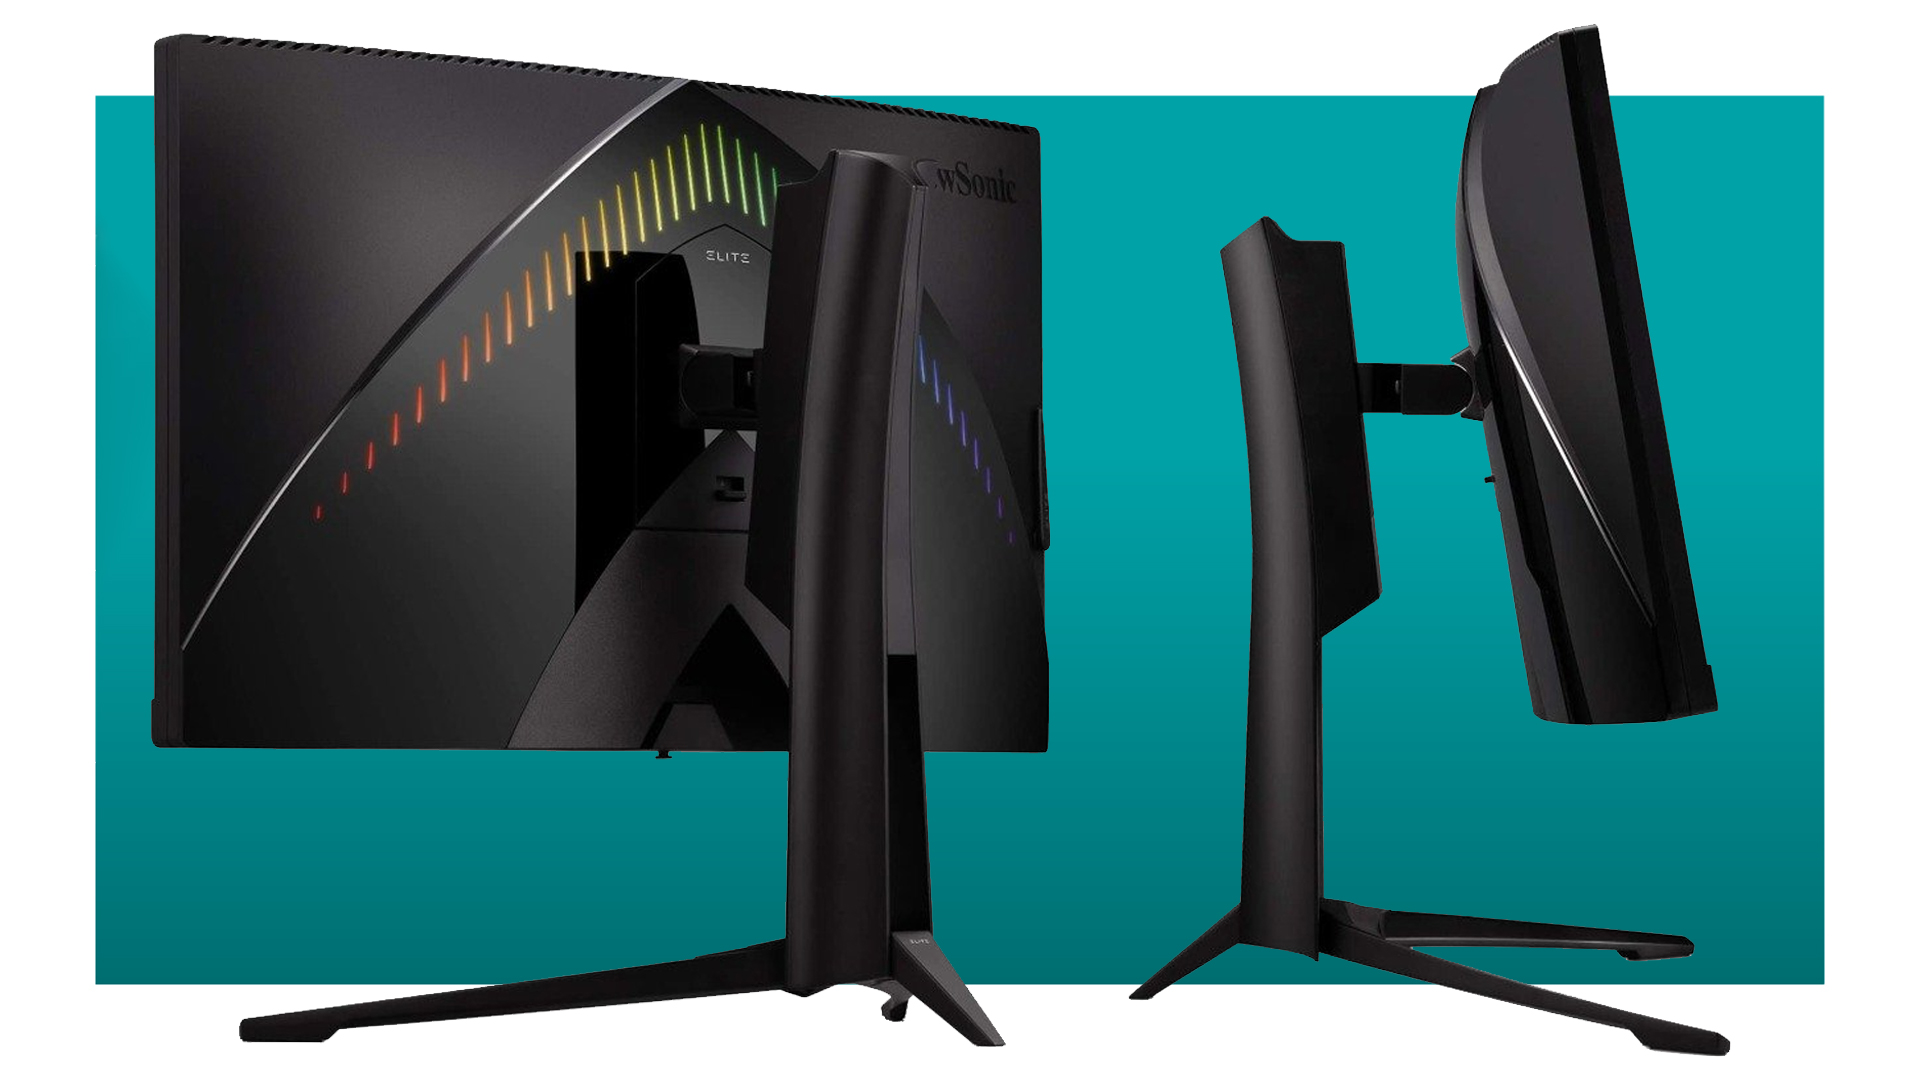  At £331 this is not a lot of money for a whole lot of curvy 1440p gaming monitor 